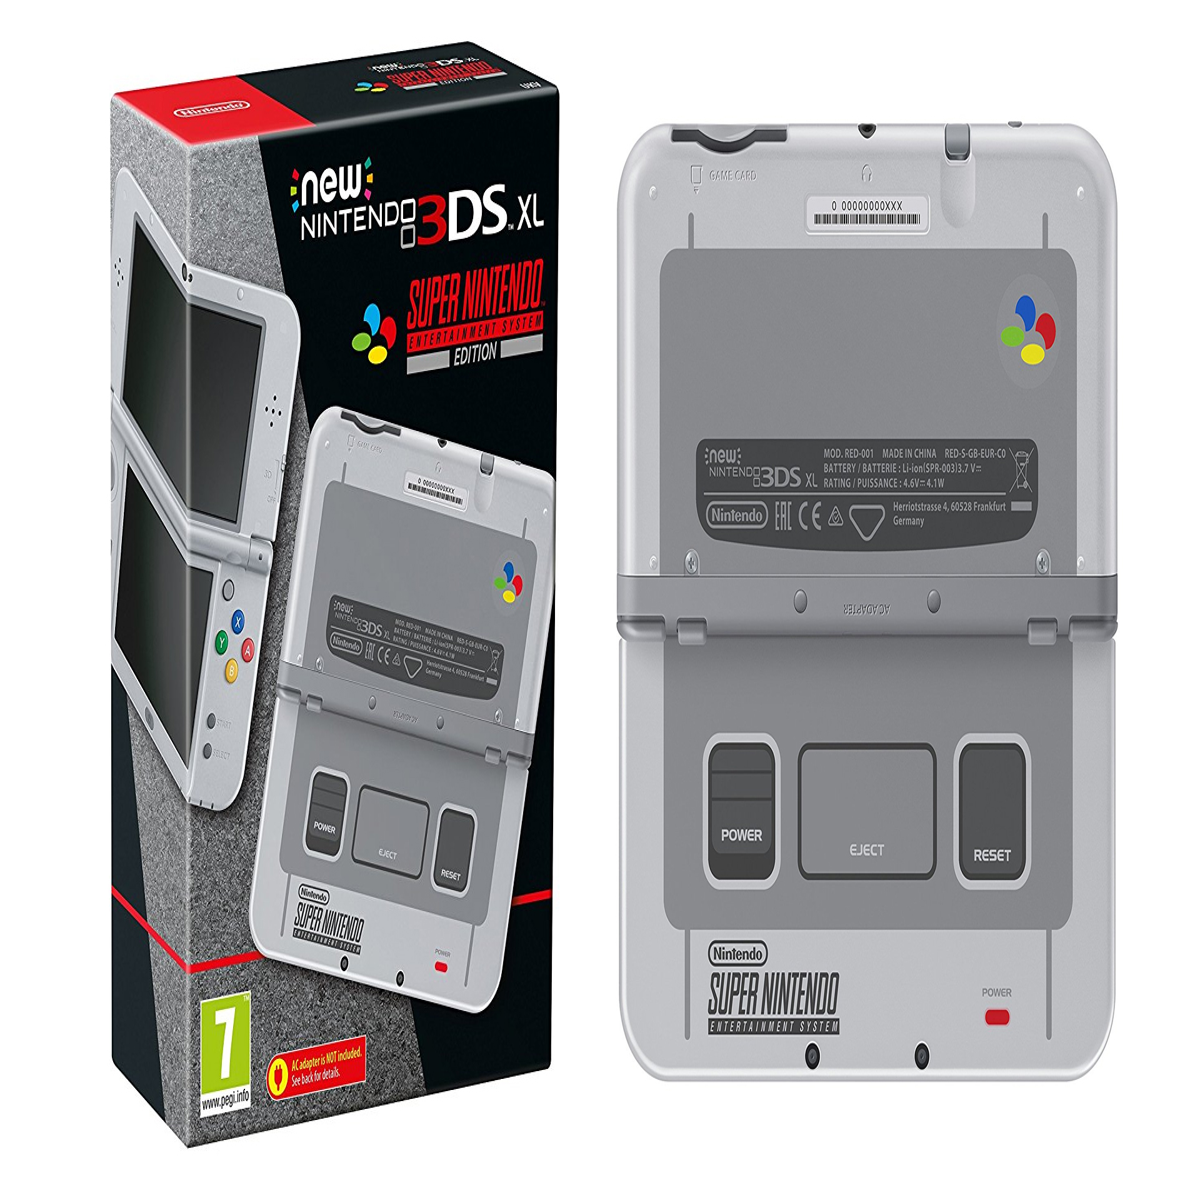 New Nintendo XL SNES Edition up pre-order now |